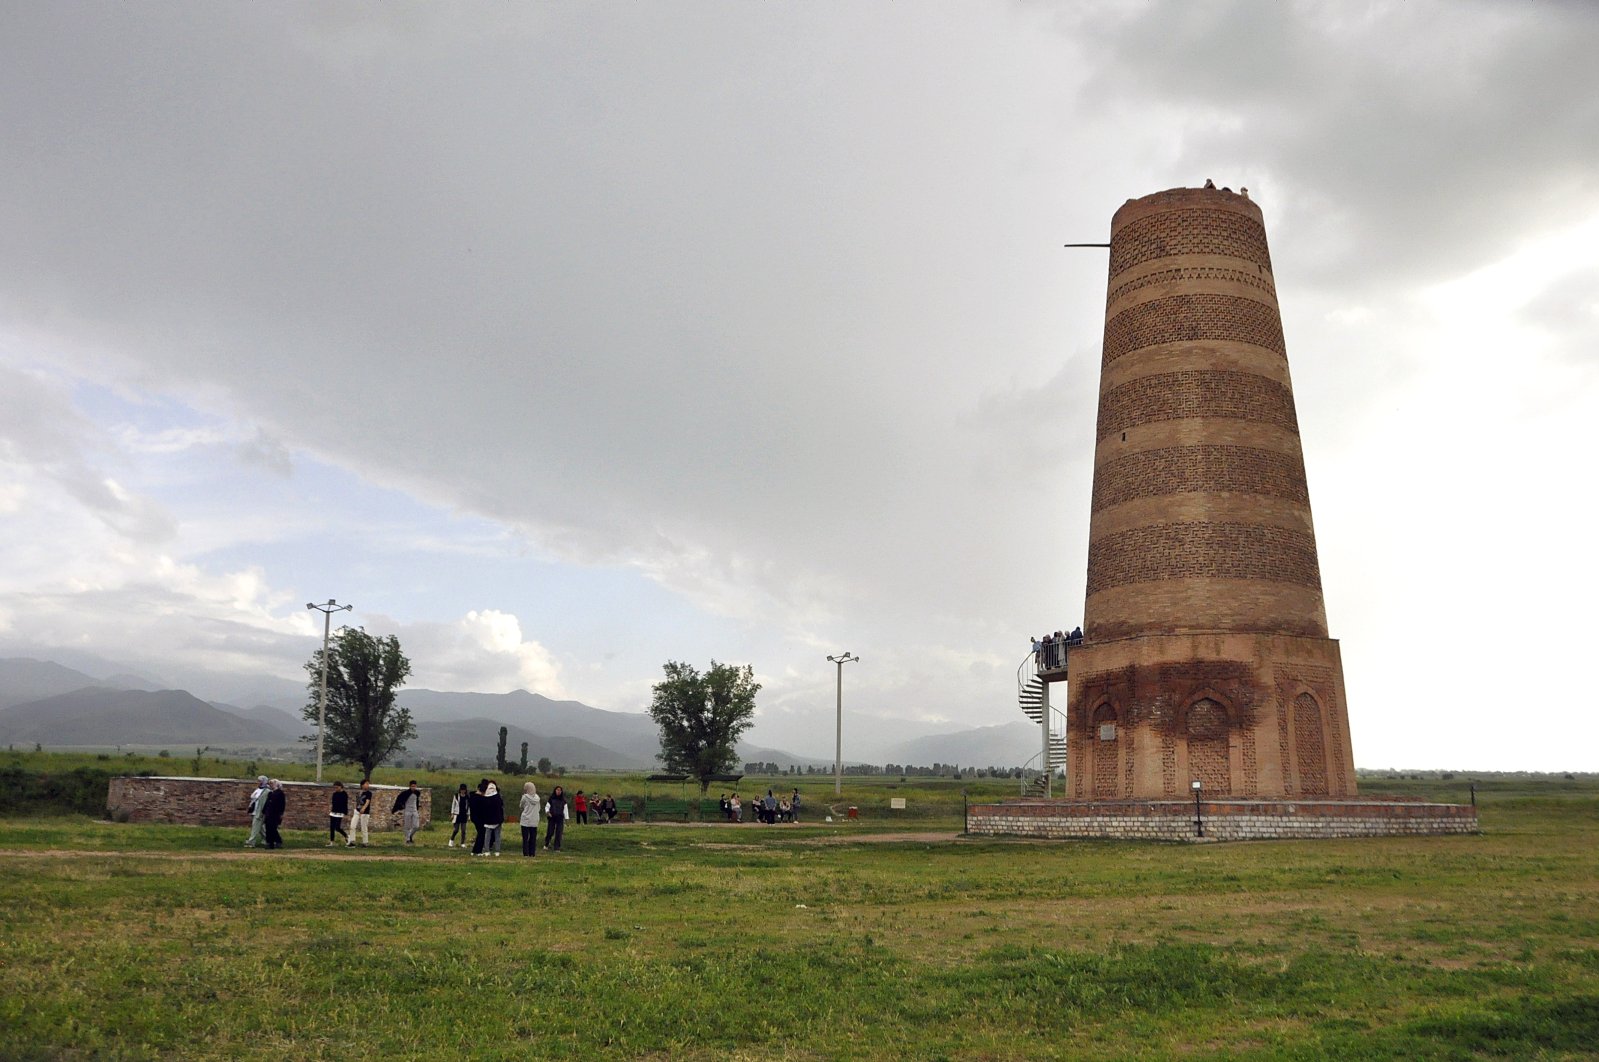 The round-shaped Burana Tower in Kyrgyzstan is frequently visited by local and foreign tourists for its history and architecture, Bishkek, Kyrgyzstan, May 25, 2022. (AA Photo)